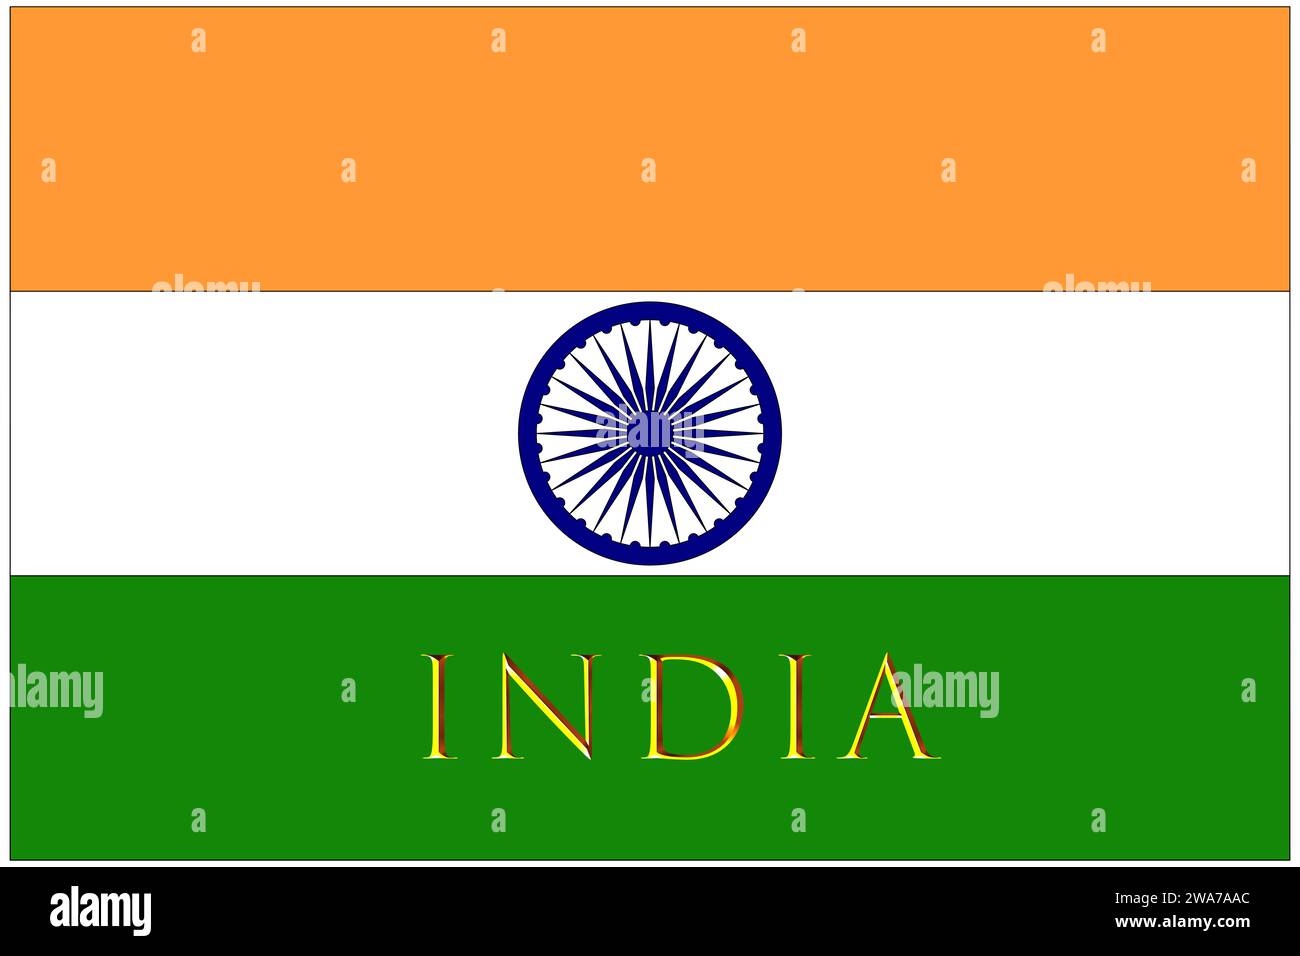 india, indian flag with the name of the nation golden india, the flag with the official correct proportions and colors. Stock Photo